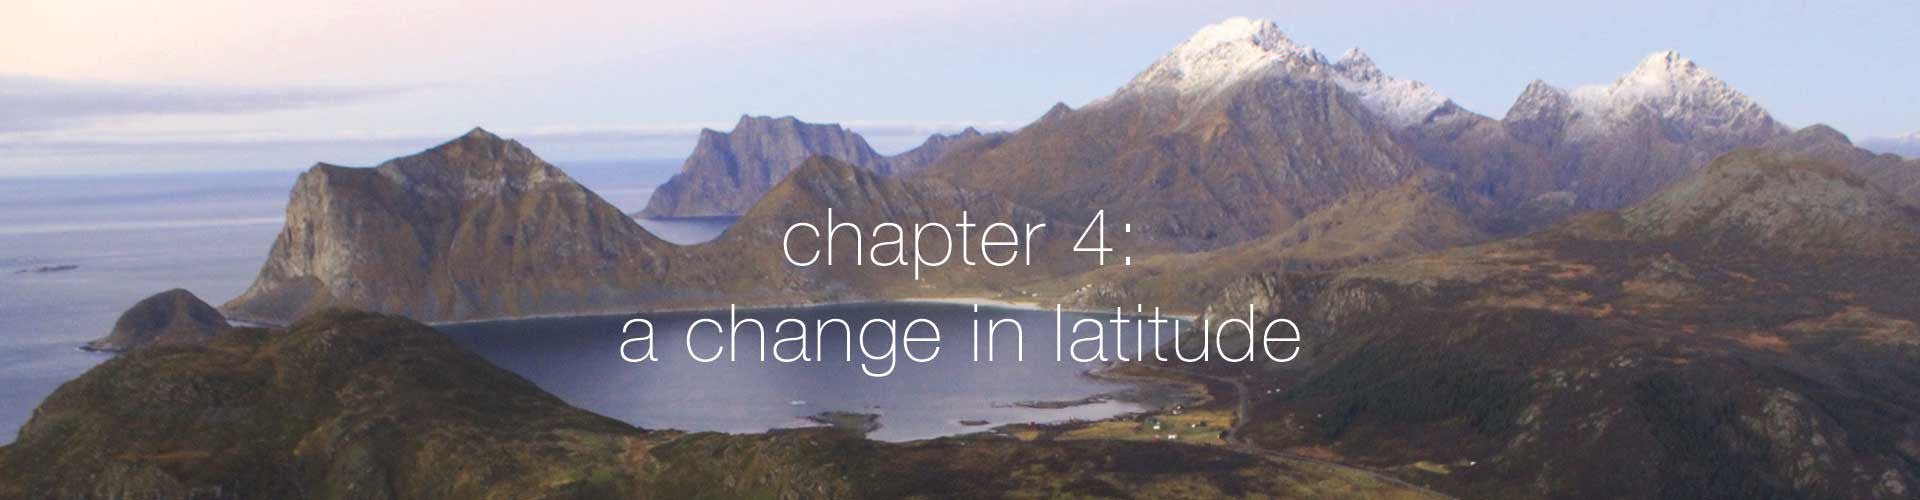 Chapter 4: A Change in Latitude